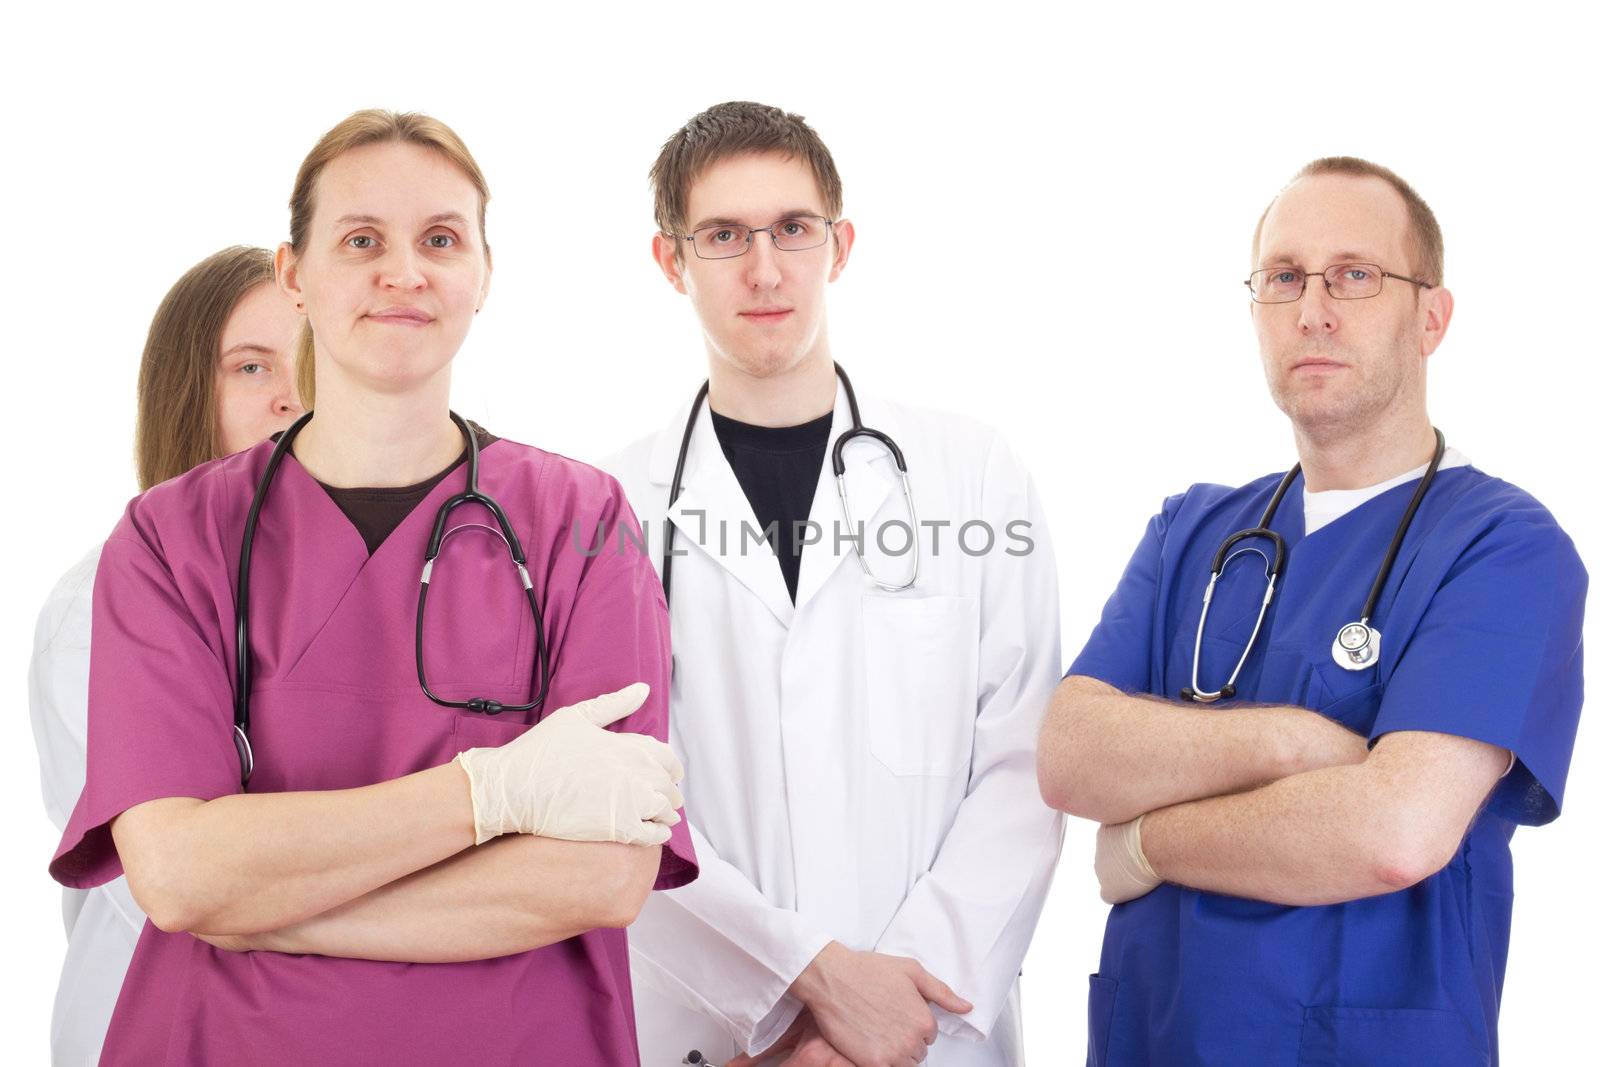 Medical people by gwolters